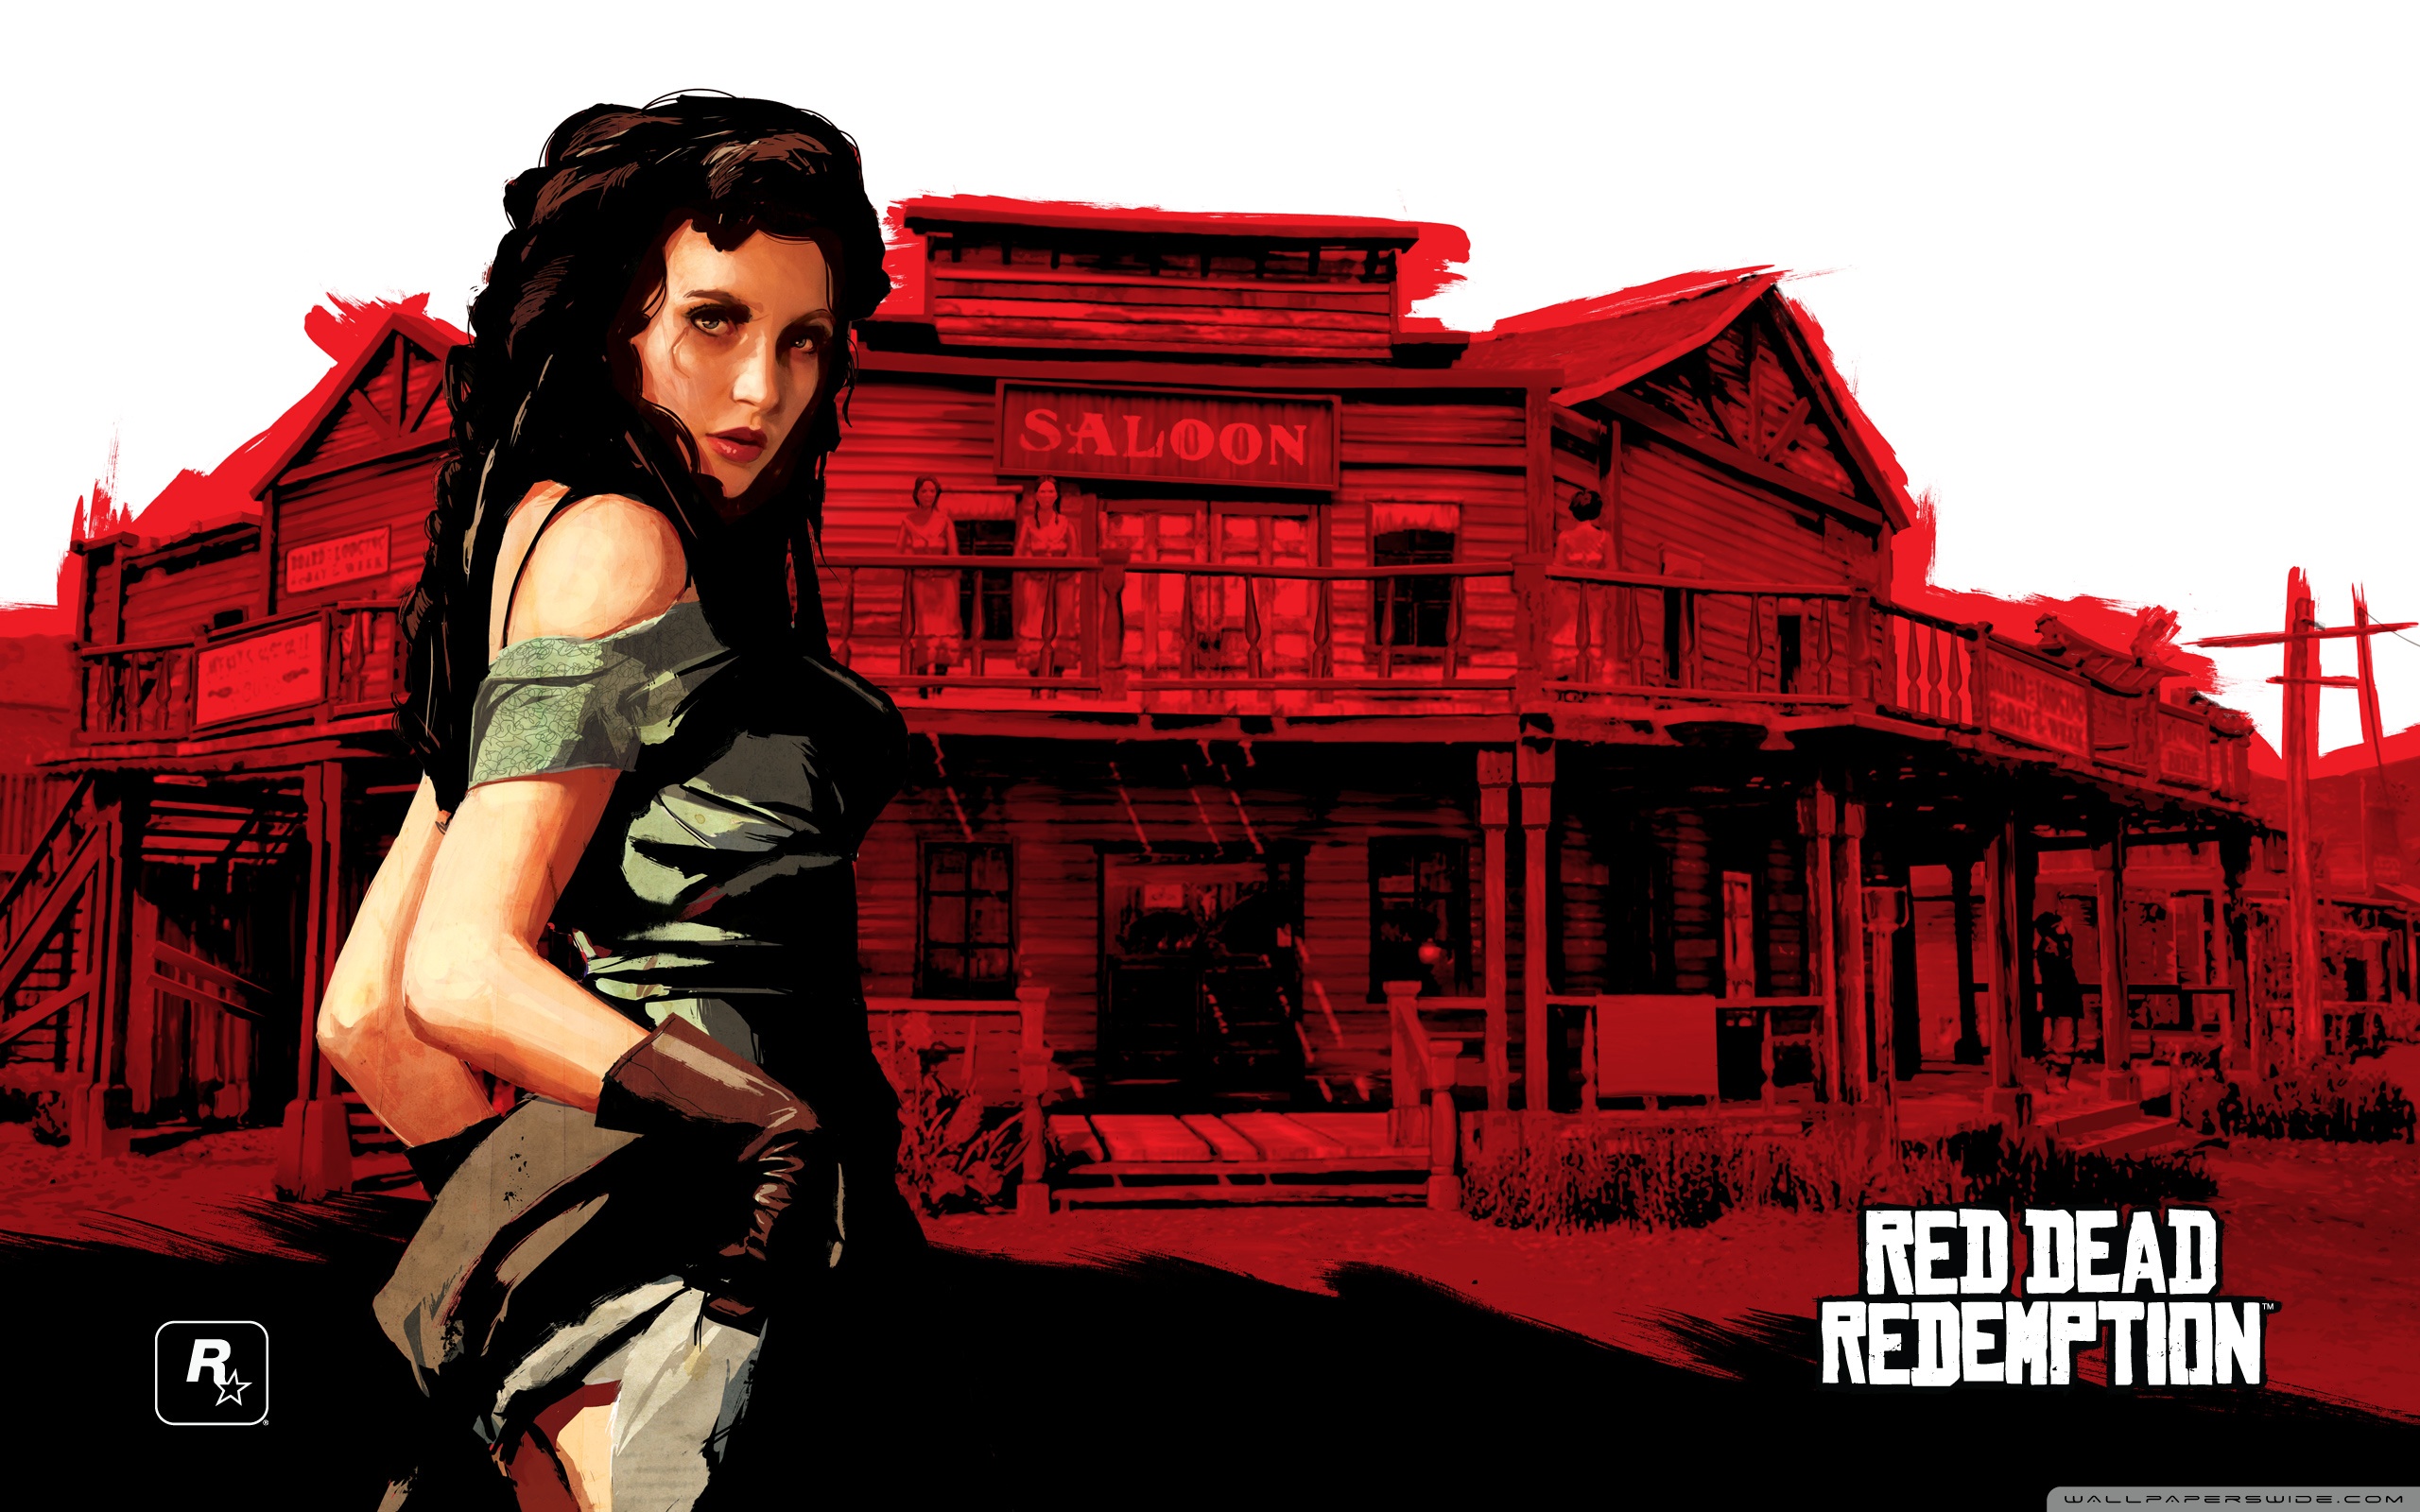 Red Dead Redemption #15